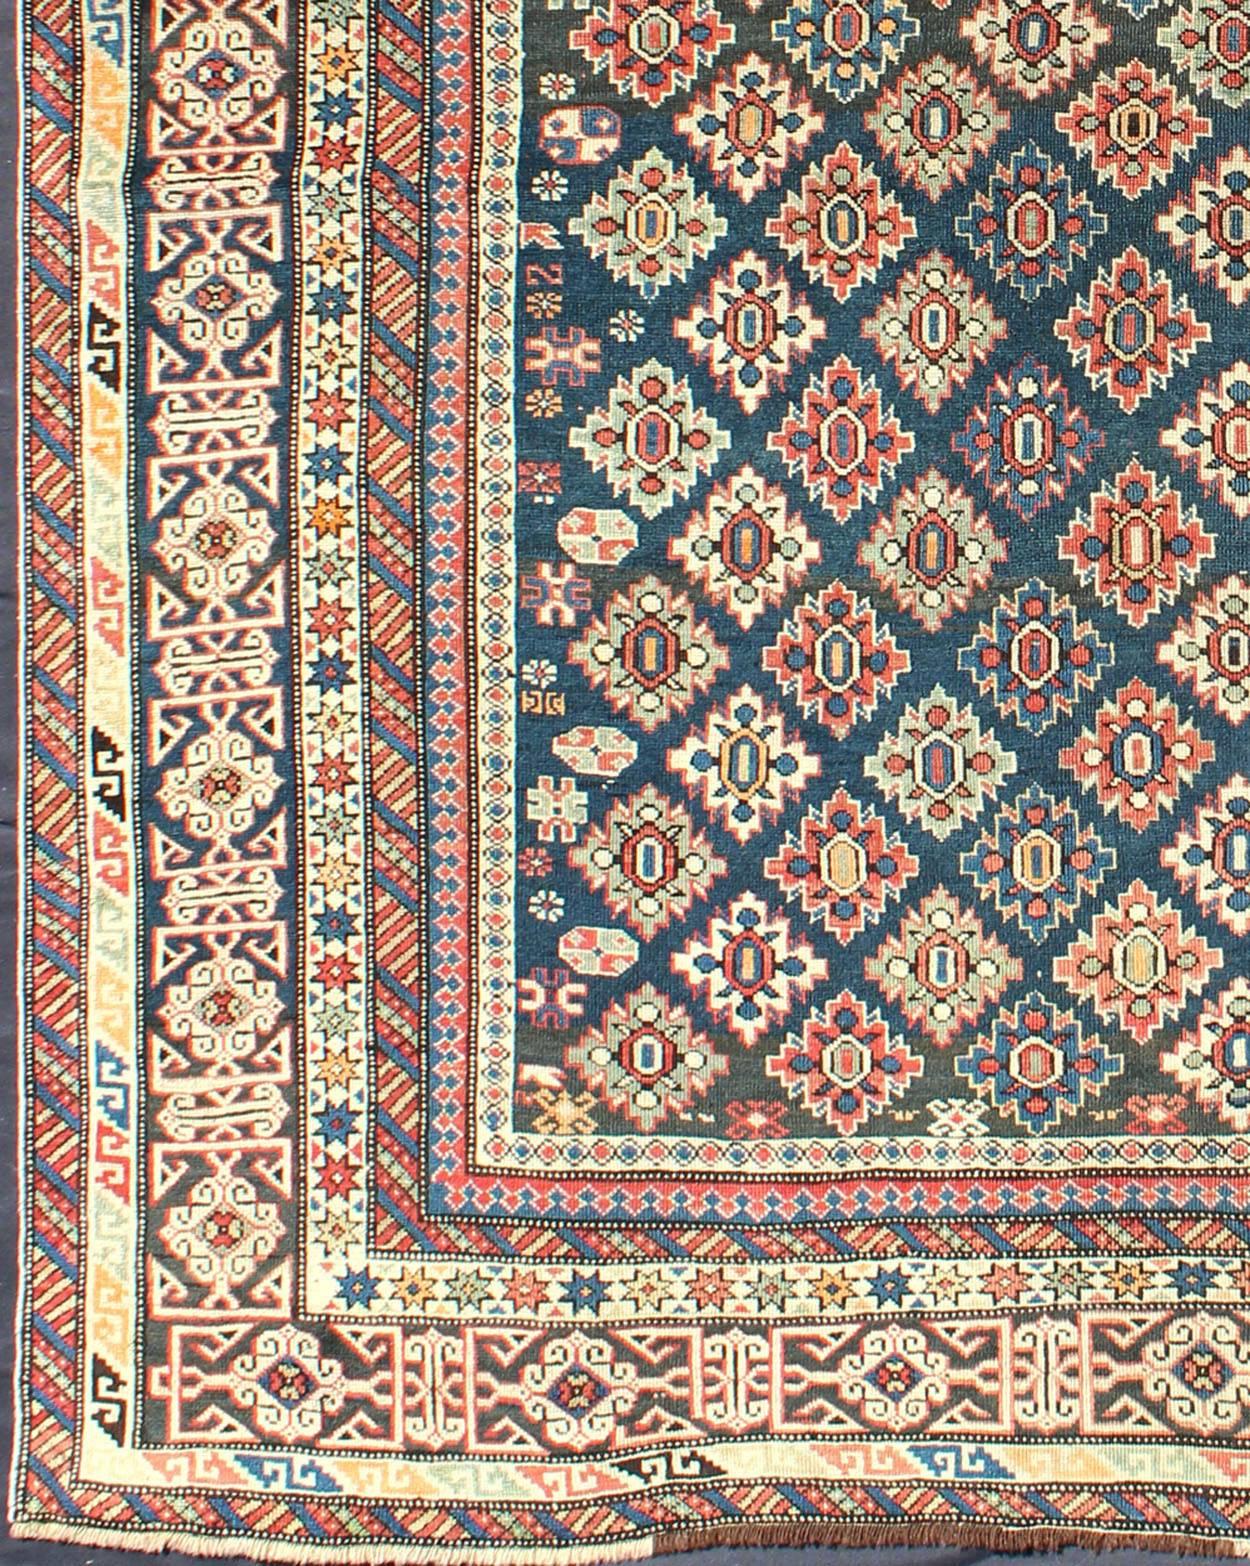 Fine weave antique Caucasian Chi-Chi rug, rug M14-0904, country of origin / type: Caucasus / Kazak, circa late-19th Century.

Chi-Chi carpets are among the finest and most fascinating Caucasian rugs among collectors. Antique Chi-Chi rugs were made